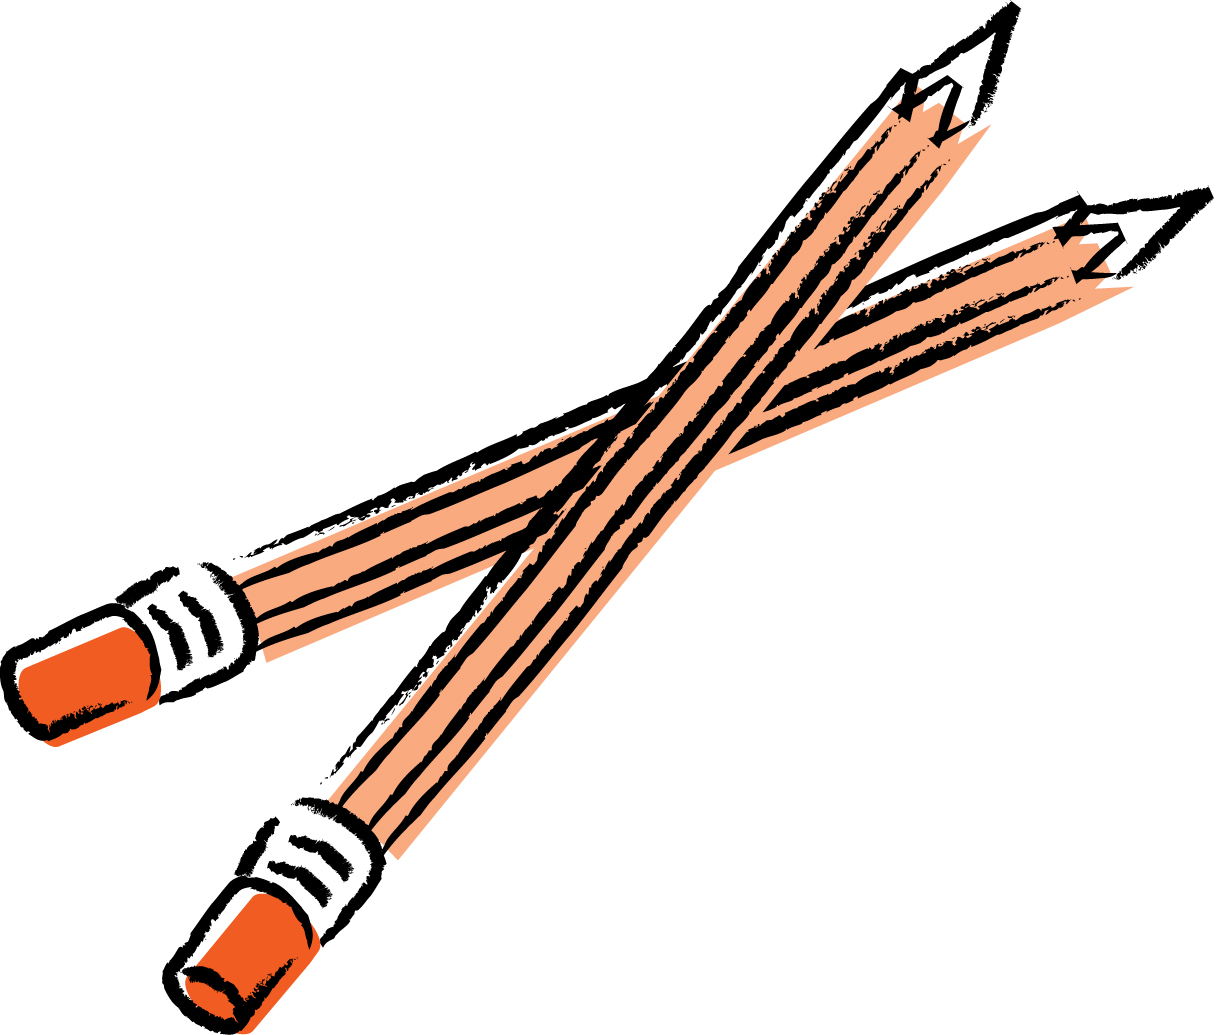 Pictures Of Pencils - ClipArt Best